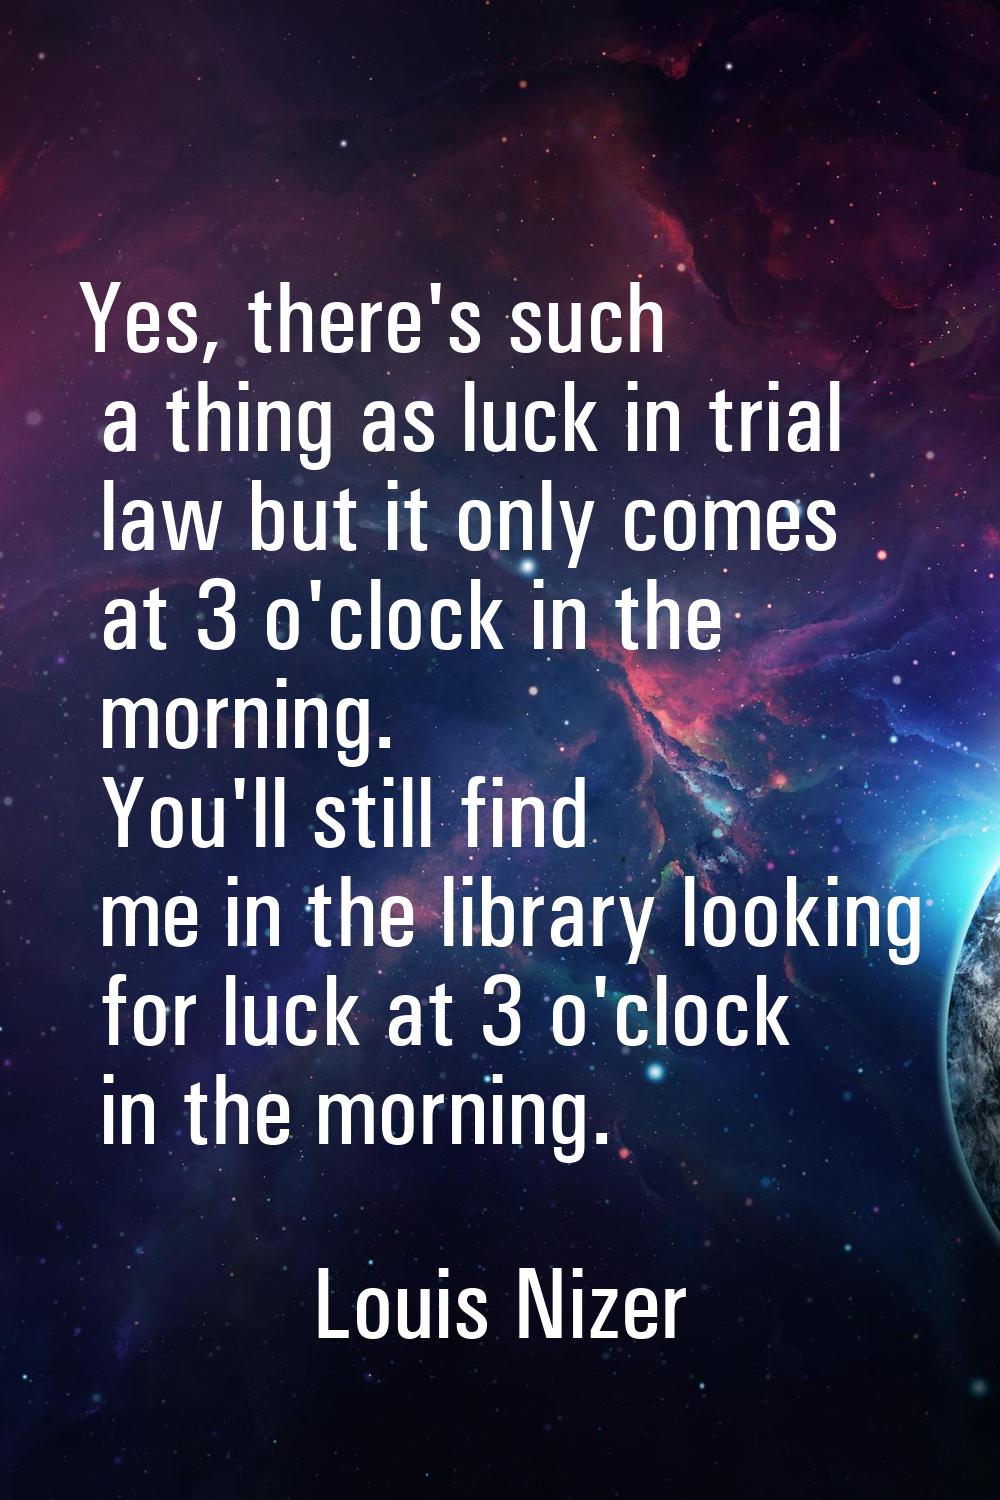 Yes, there's such a thing as luck in trial law but it only comes at 3 o'clock in the morning. You'l